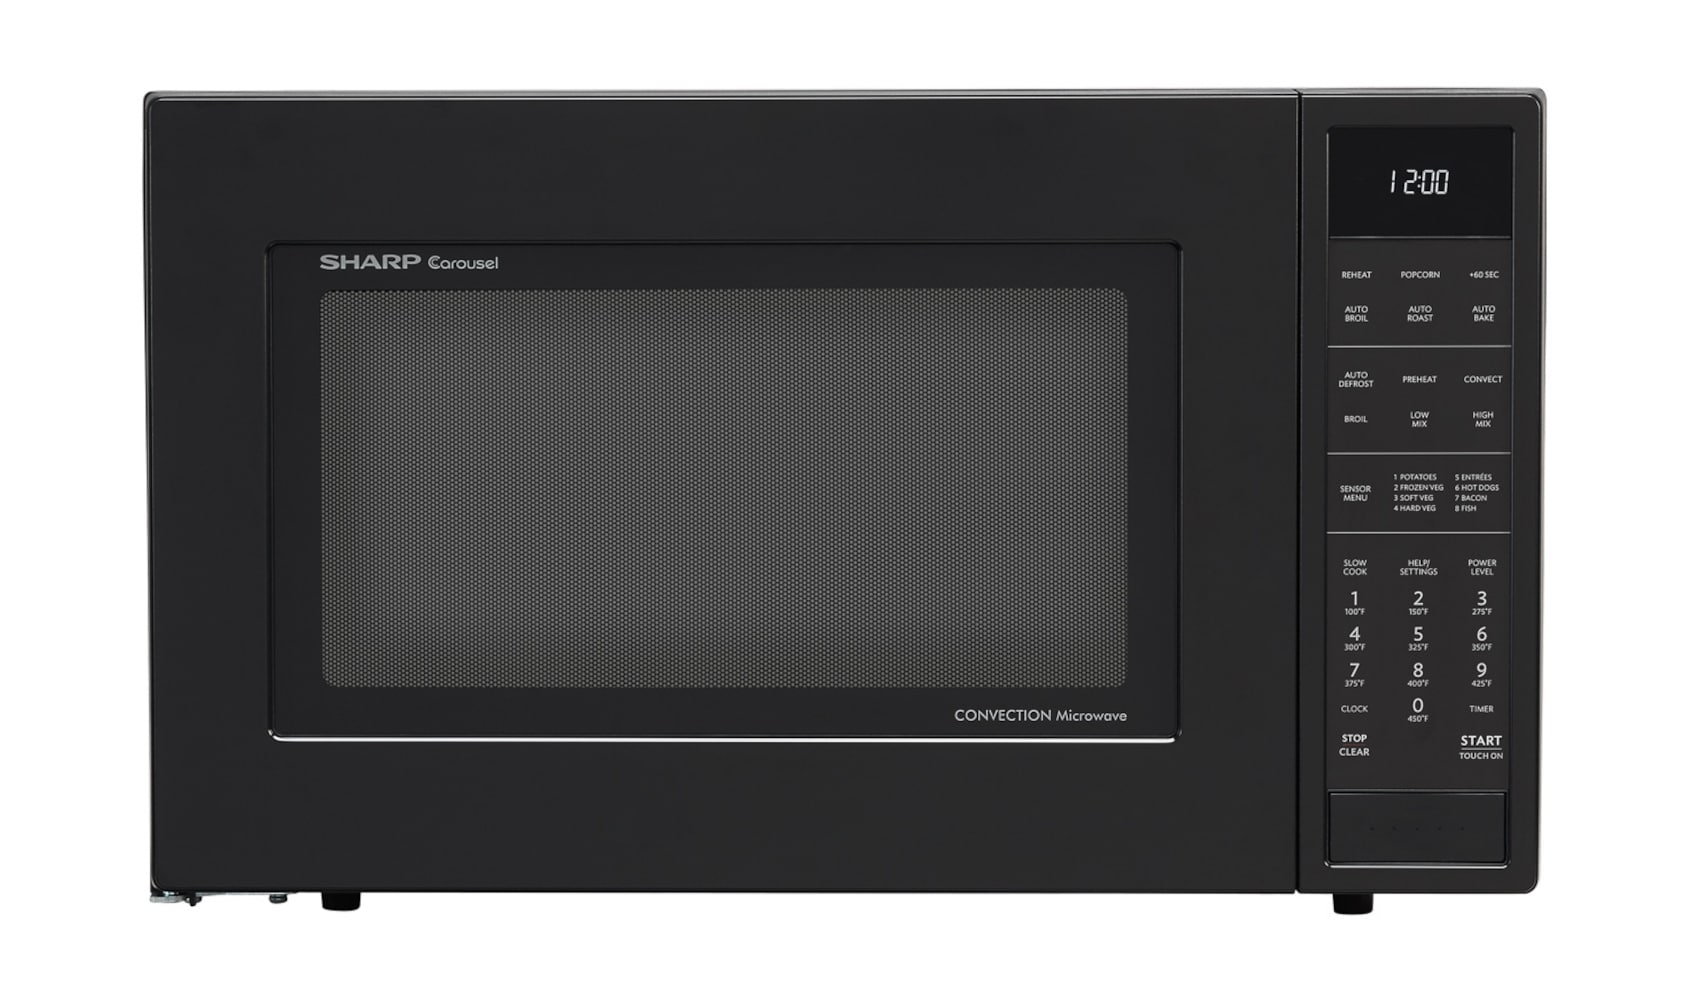 Best Buy: Sharp 0.5 Cu. Ft. Compact Microwave/Toaster Oven